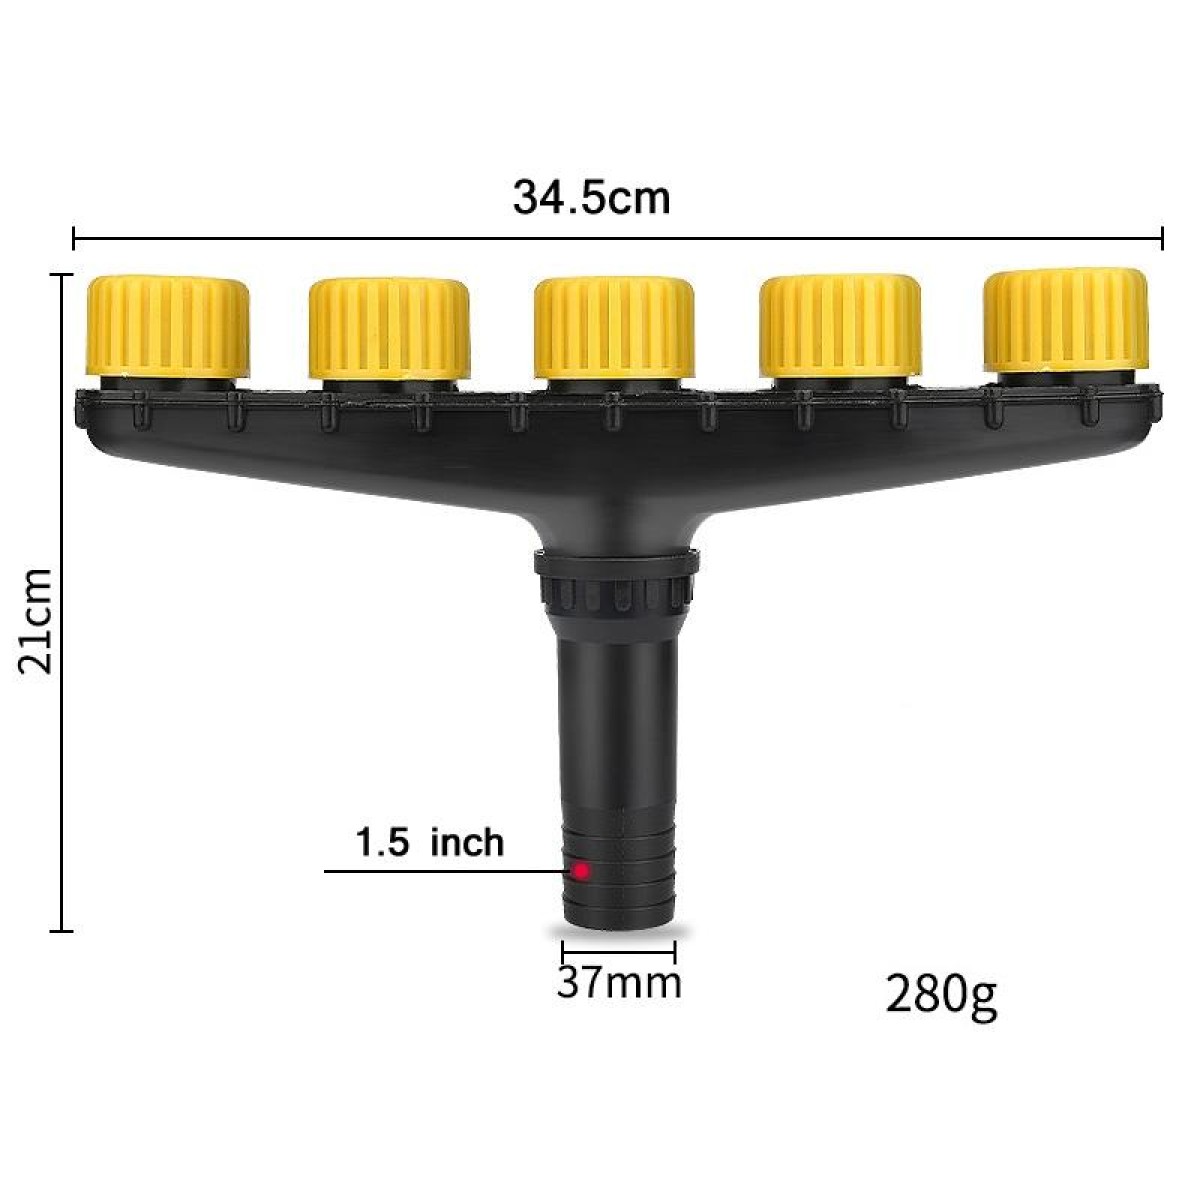 DKSSQ Gardening Watering Sprinkler Nozzle, Specification: 5 Head with 1.5 inch Interface